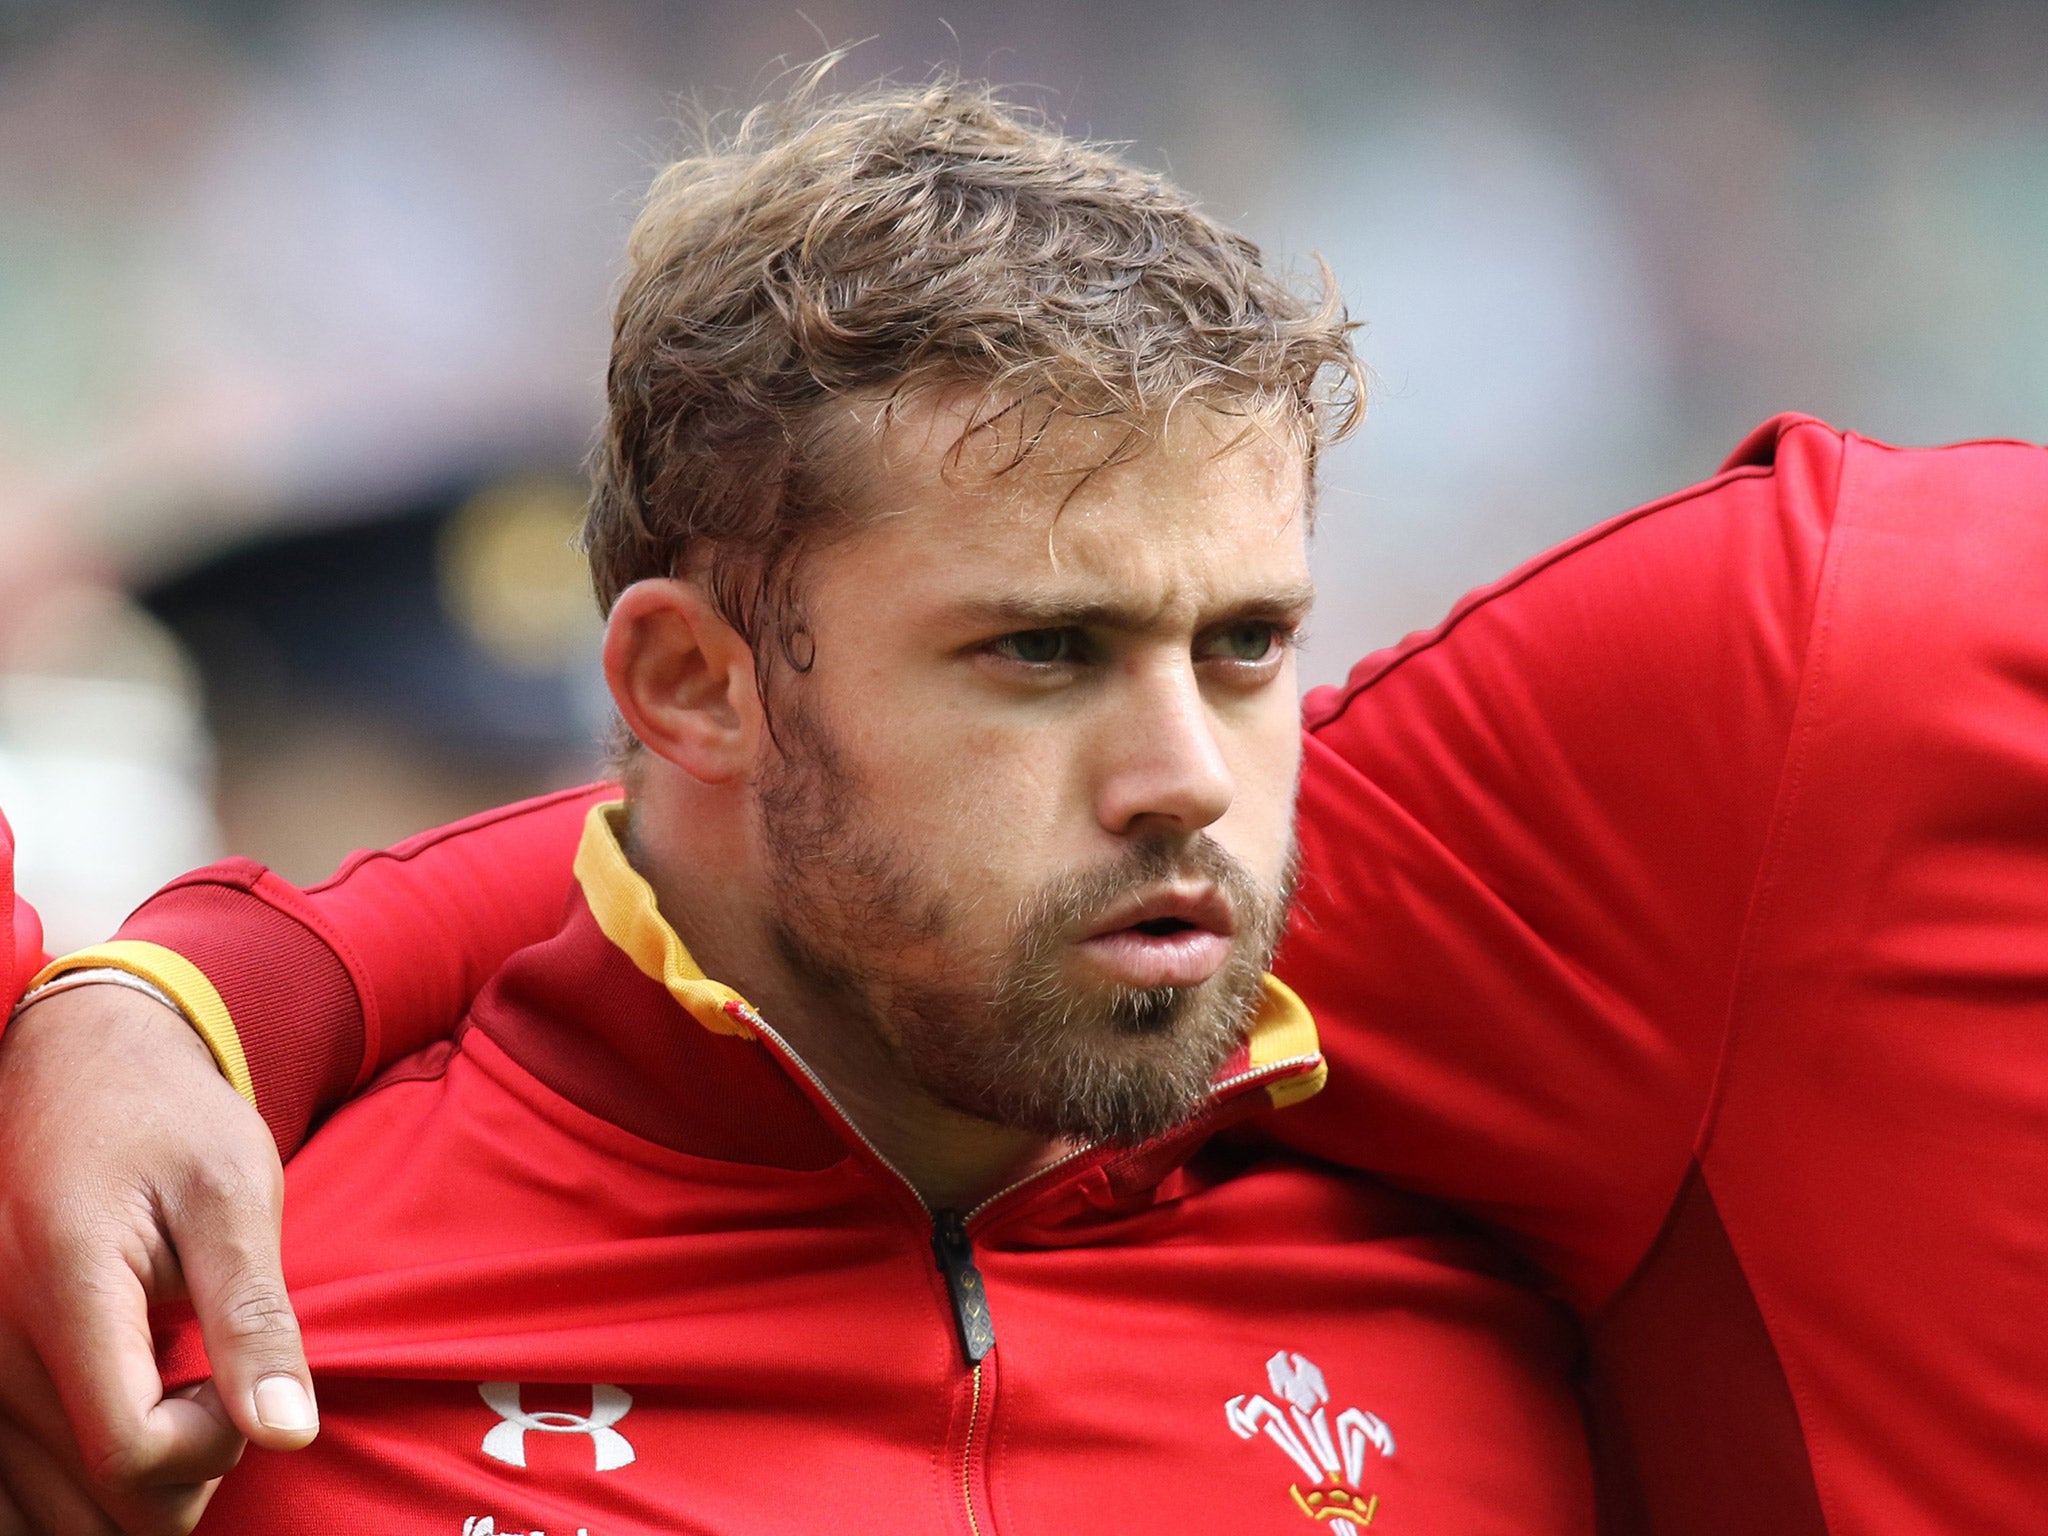 Leigh Halfpenny has not played rugby since injuring his knee in a World Cup warm-up last year